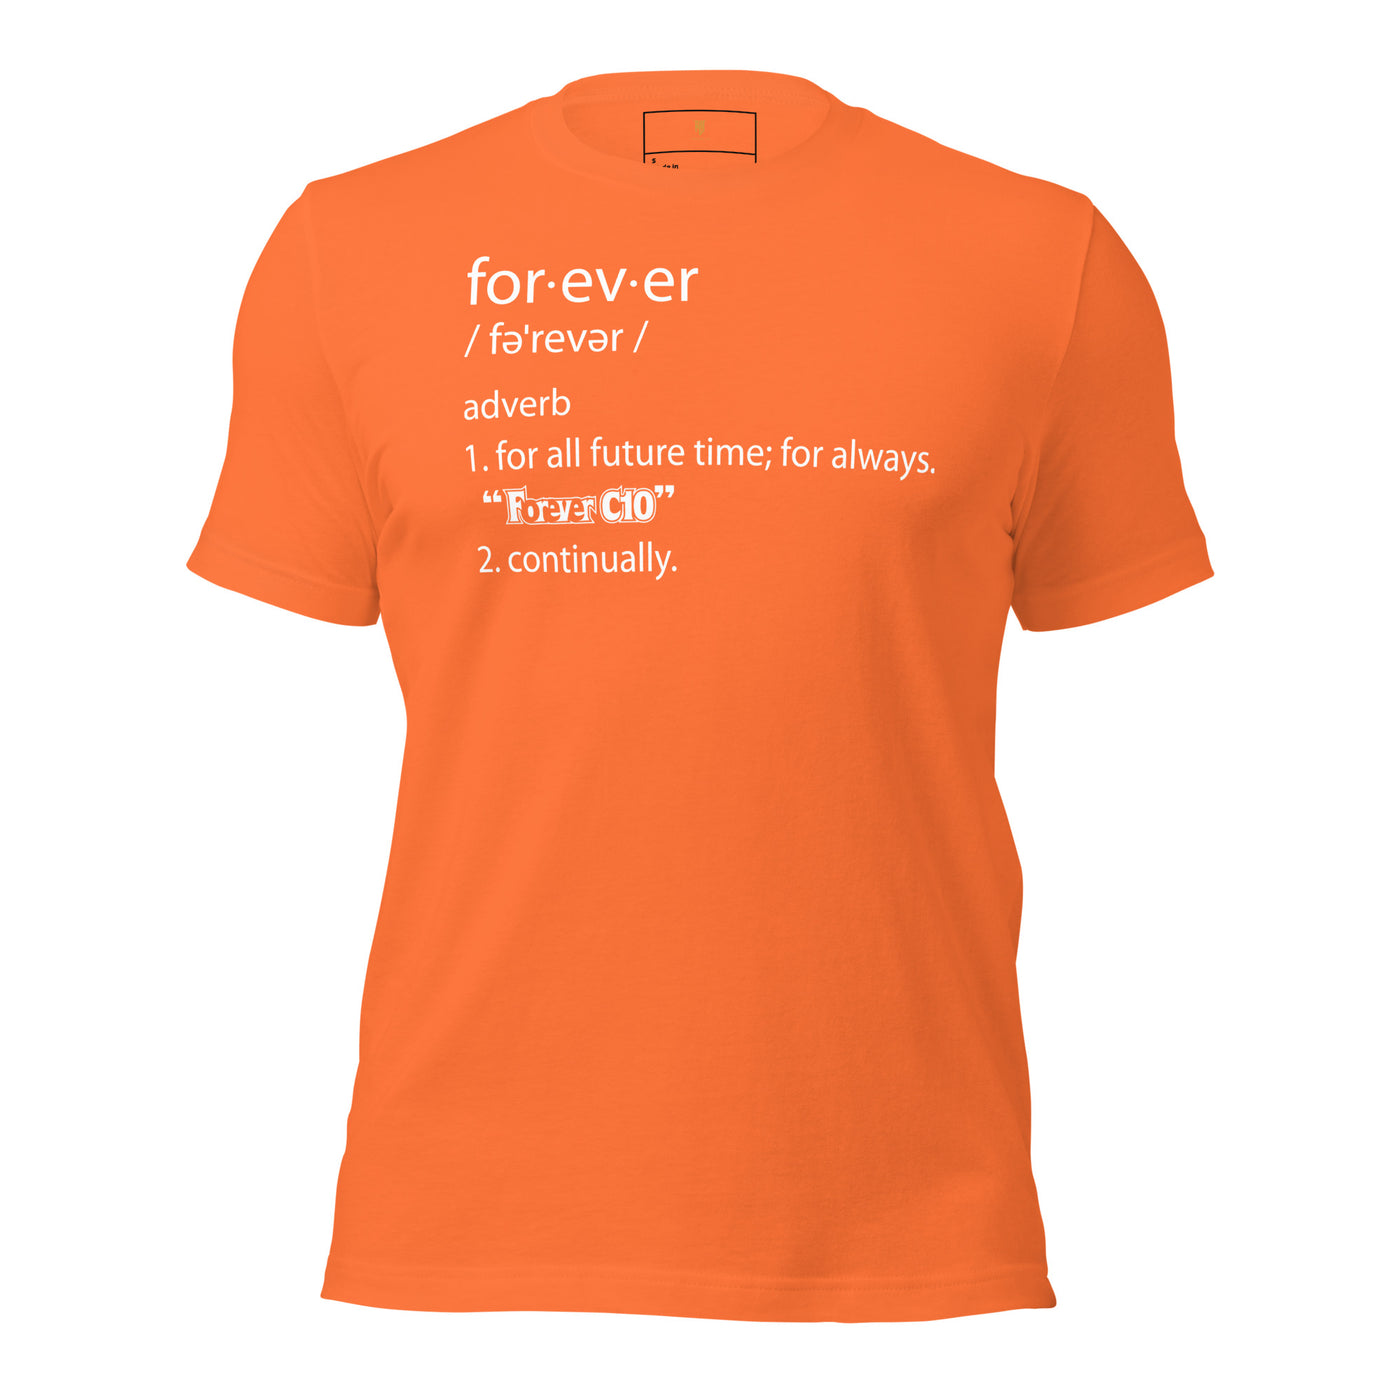 THE FOREVER DEFINITION UNISEX T-SHIRT; Versatile Unisex T-Shirts, Modern Unisex T-Shirt Designs, Fashion-Forward Unisex T-Shirt Trends, Sustainable Unisex Tee's